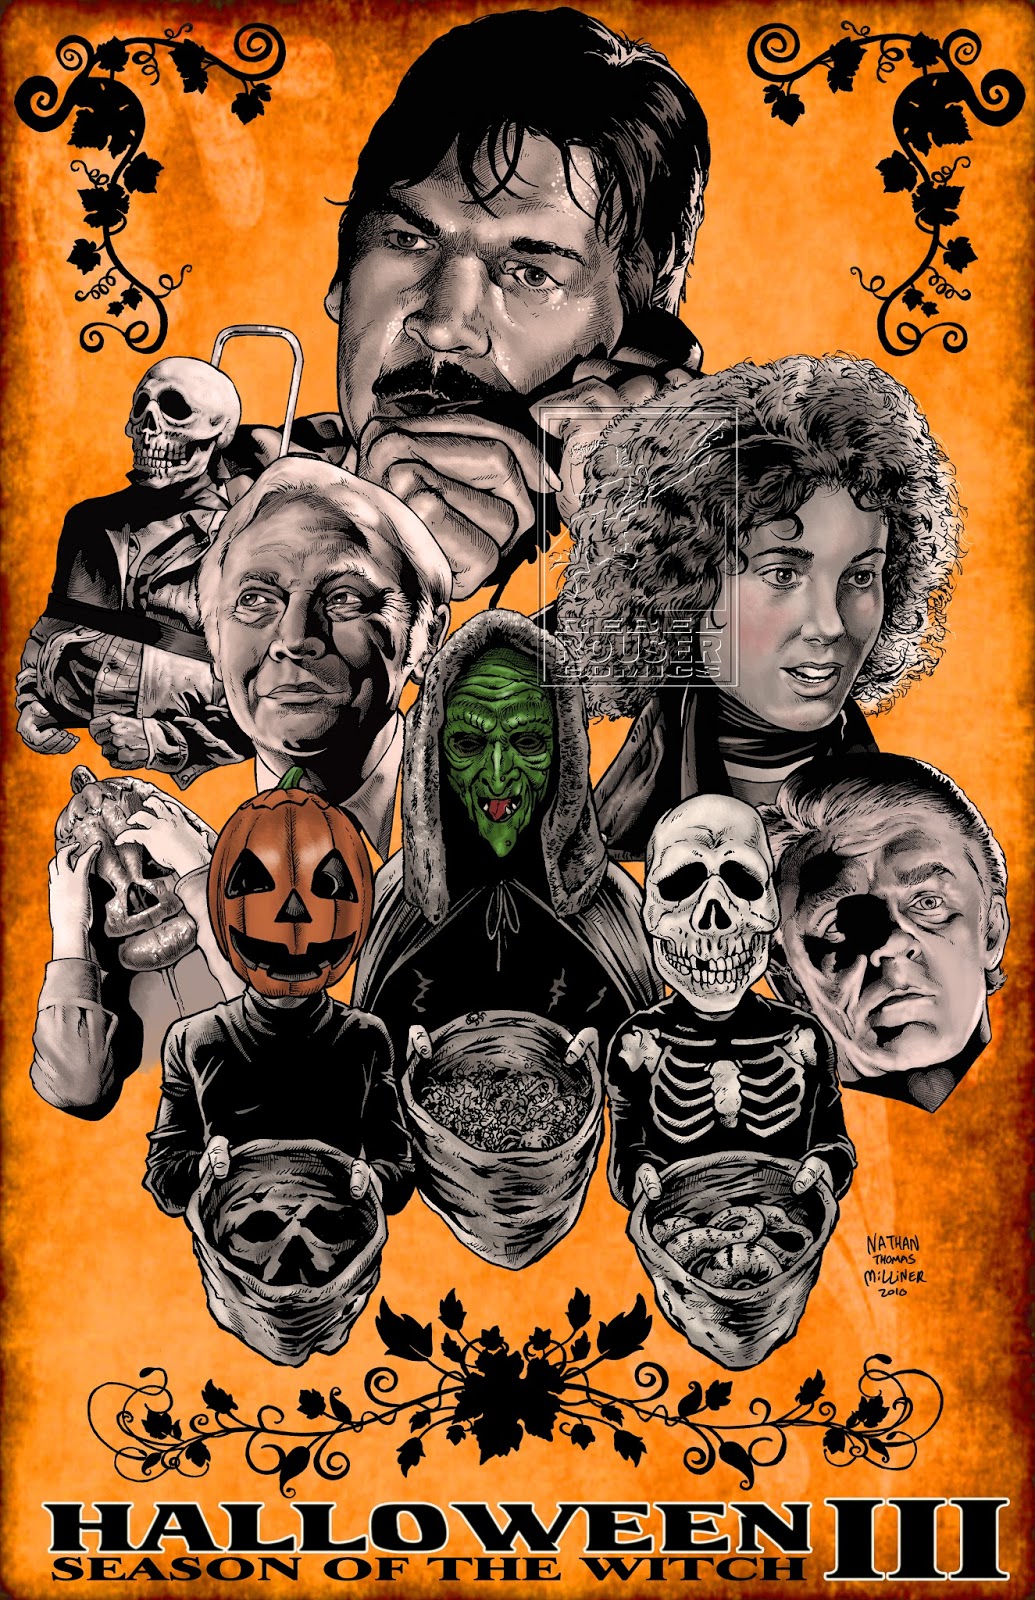 Halloween Wallpaper: The Horrors of Halloween: HALLOWEEN III SEASON OF THE WITCH Artwork / Posters and Video Mixtape